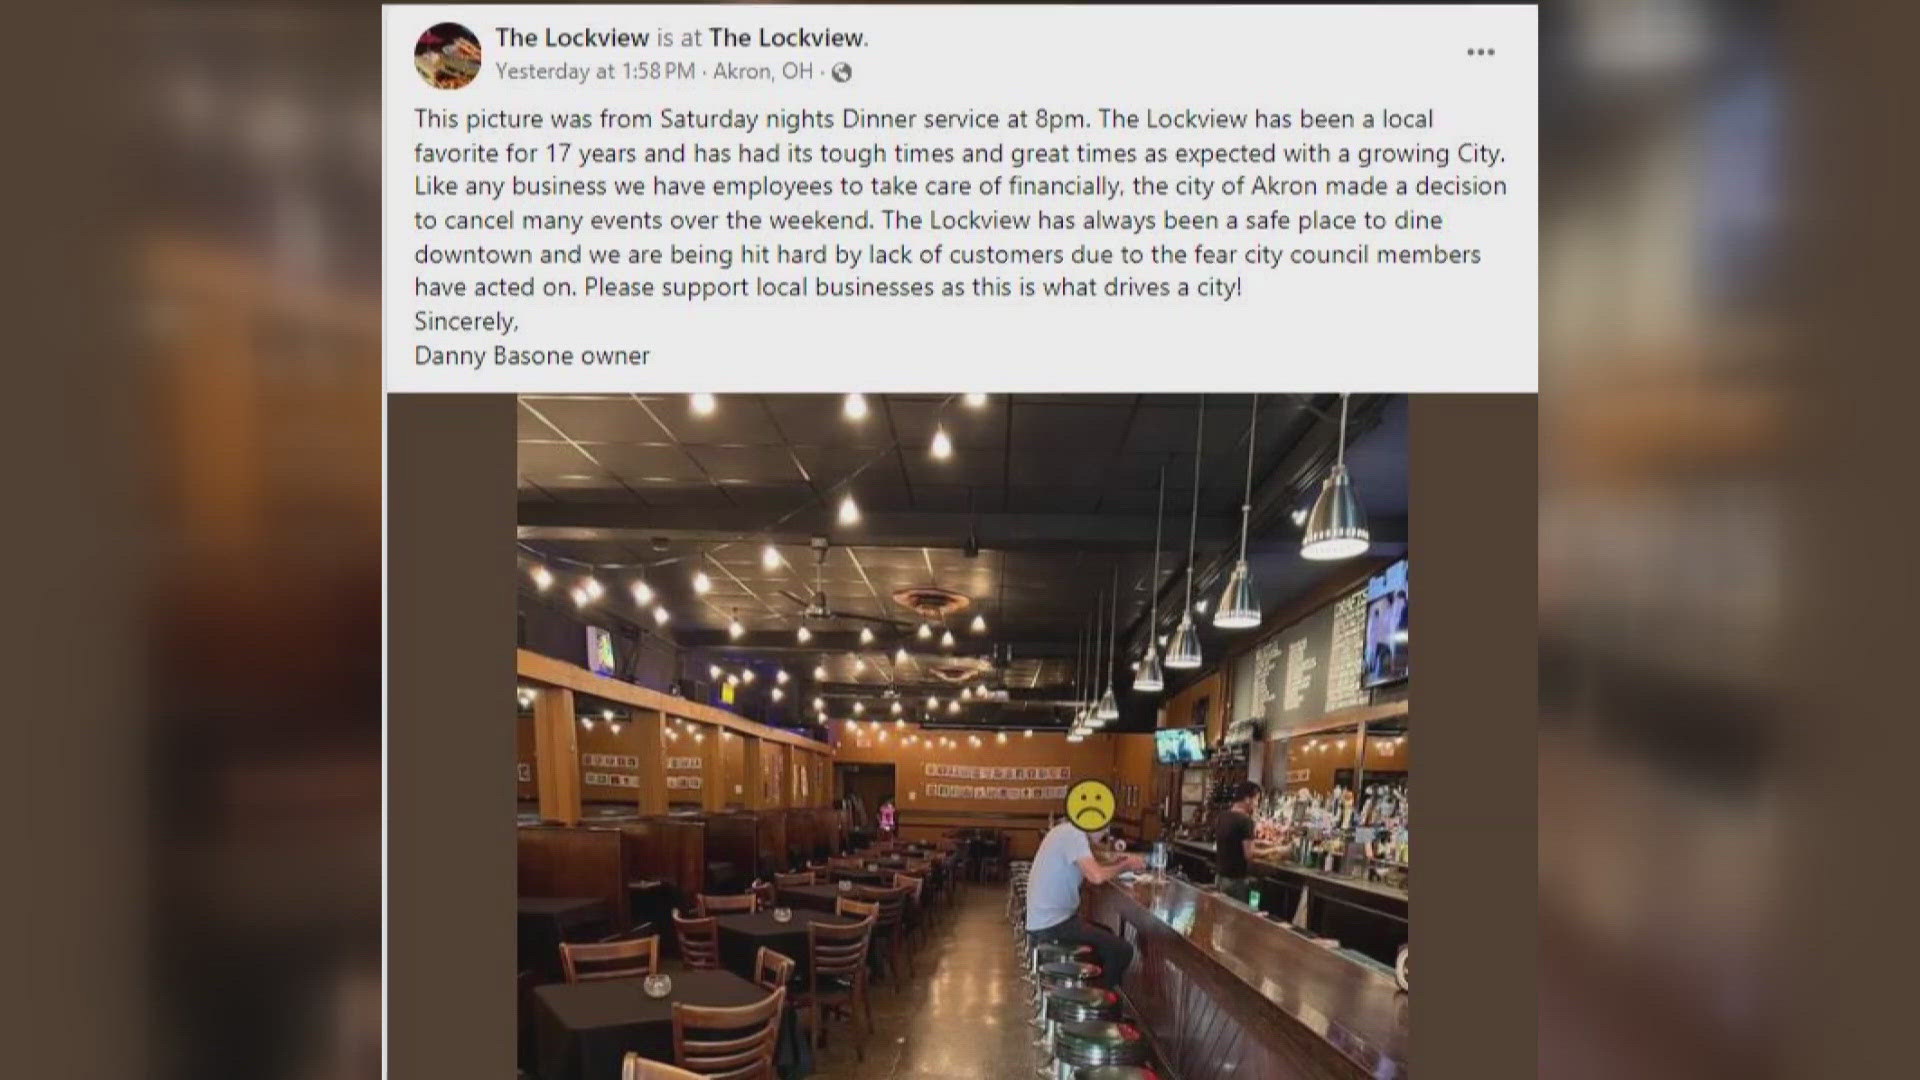 In Summit County, a business owner in downtown Akron is sharing his frustration after city leaders cancelled multiple events last weekend at the last minute.